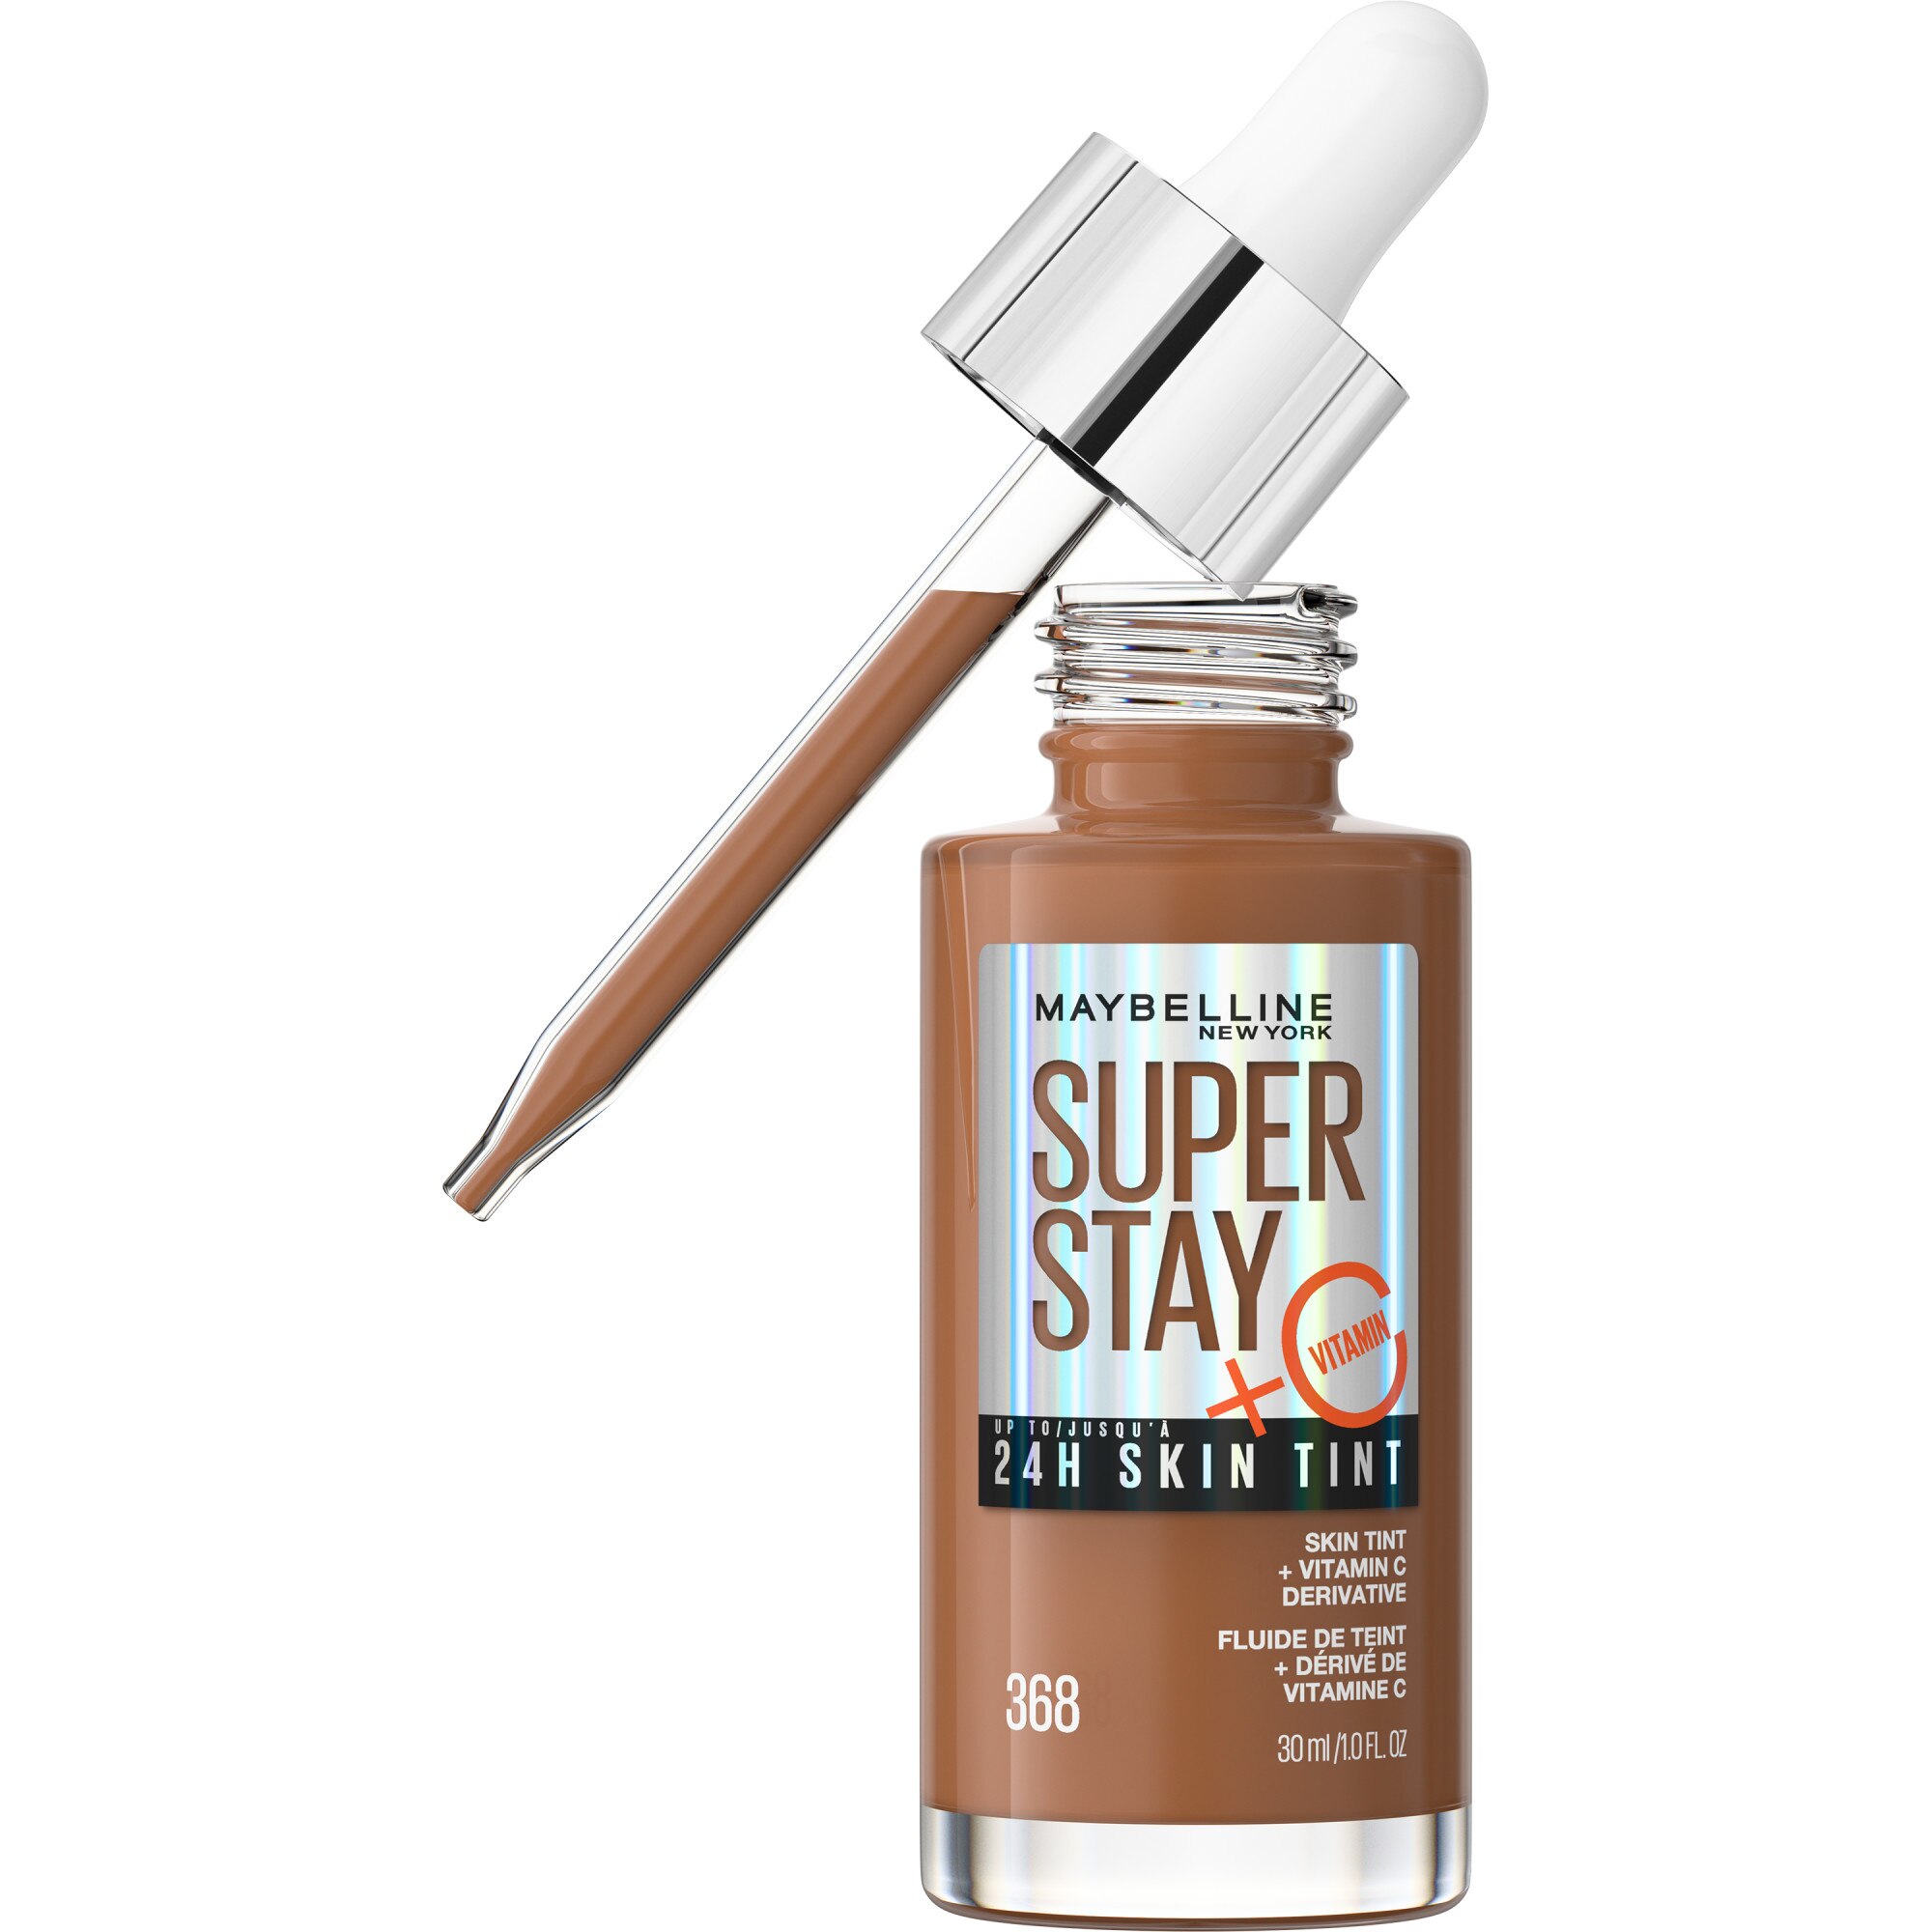 Maybelline New York Super Stay Up To 24HR Skin Tint With Vitamin C, 368, 1 Oz , CVS